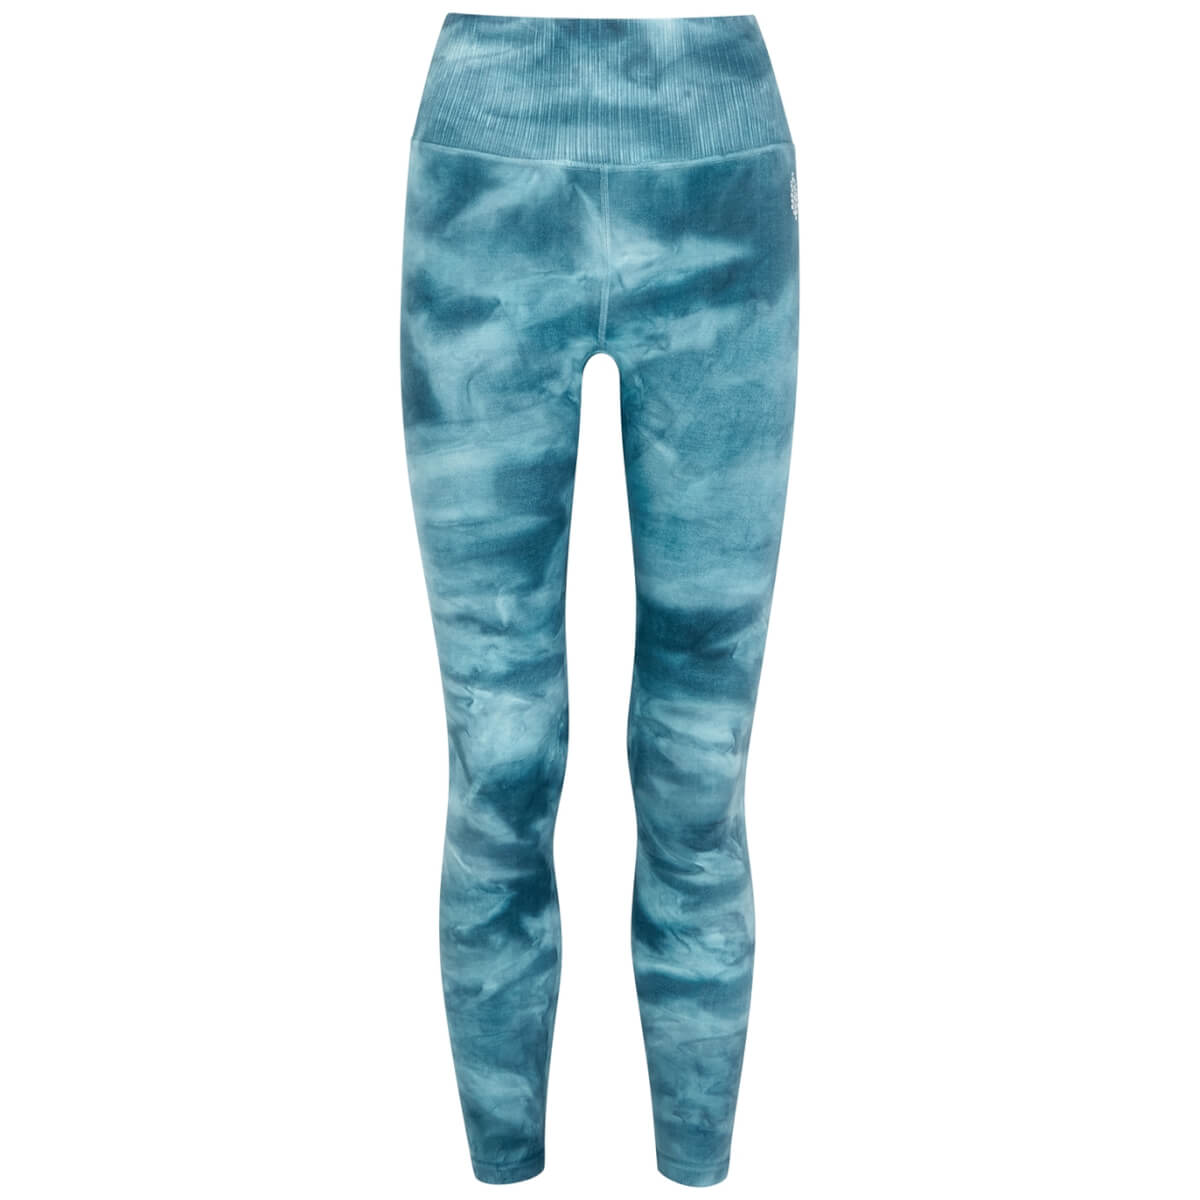 Free People Movement Good Karma Tie-dyed Stretch-jersey Leggings - Blue - M/L